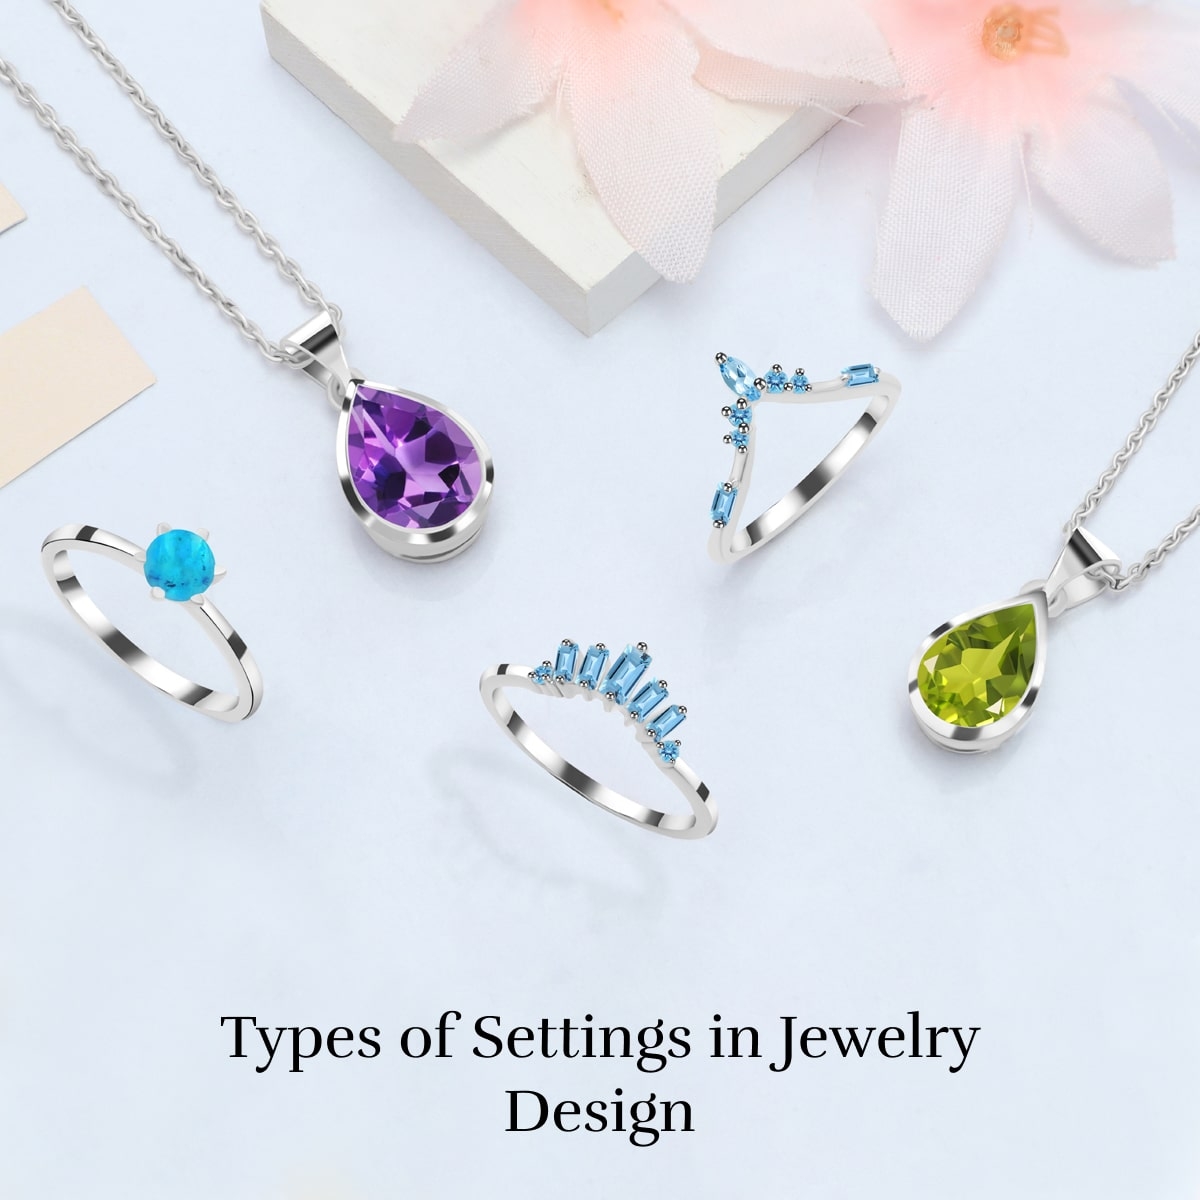 What Are the Different Types of Jewelry Settings